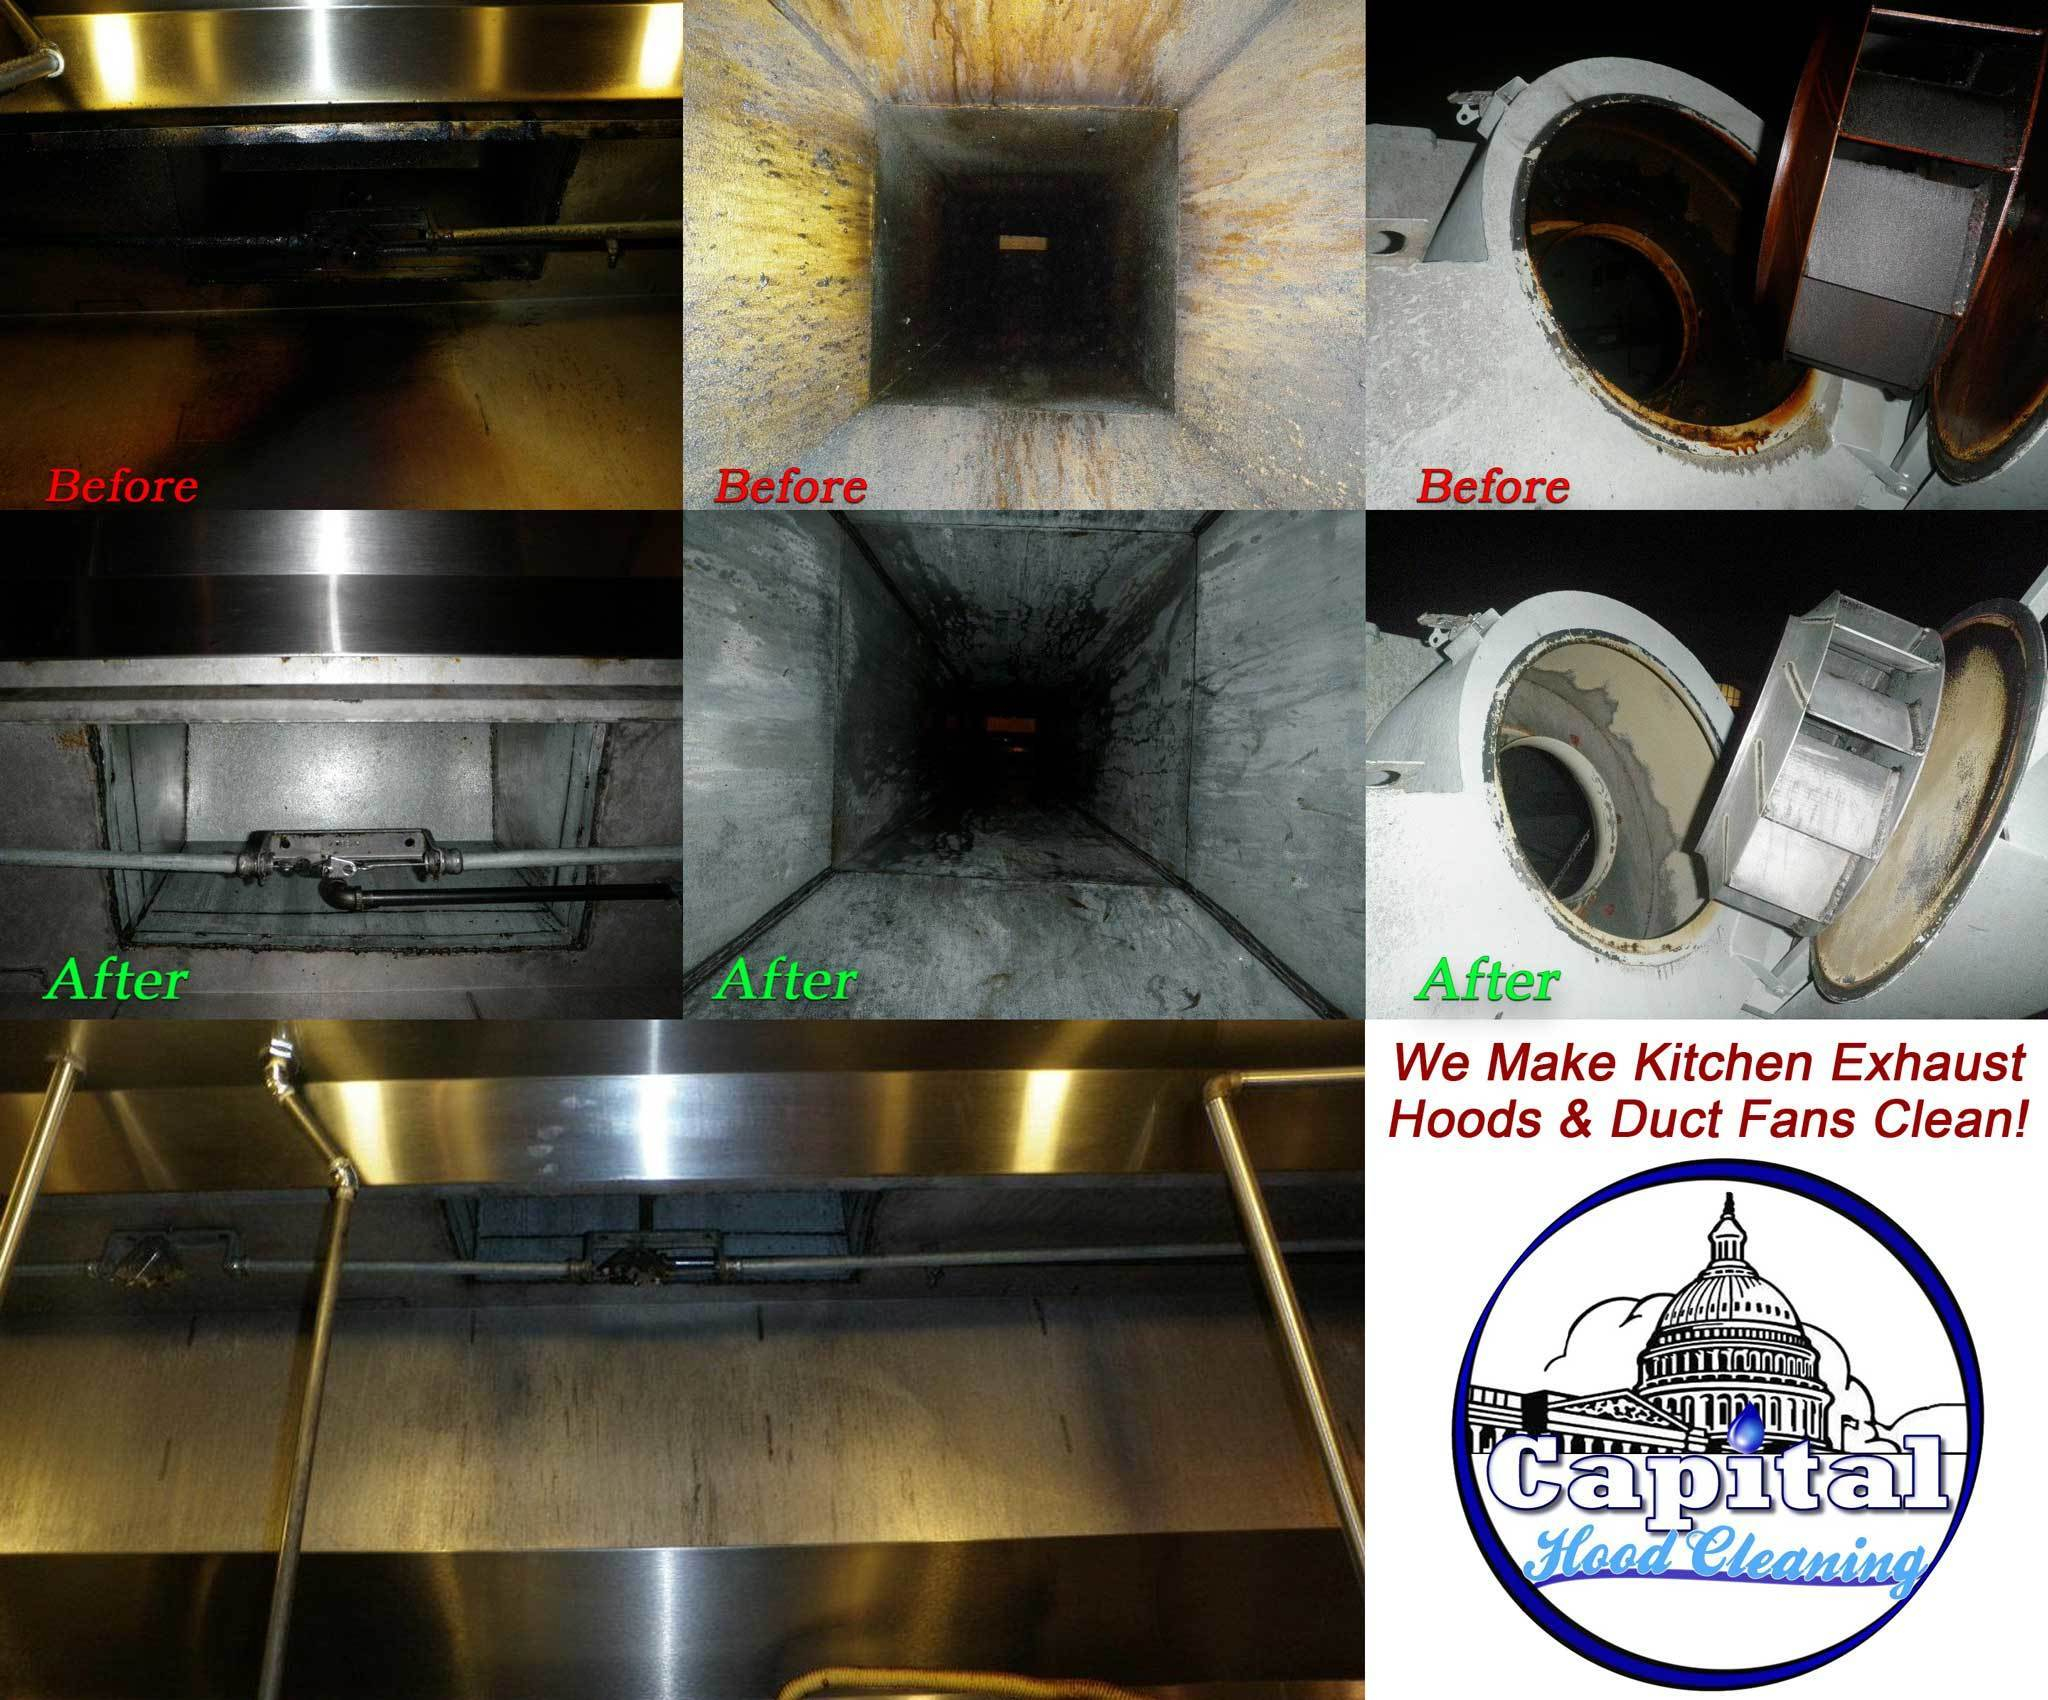 Hood Cleaning Service Commercial Kitchen Exhaust Fans in size 2048 X 1700